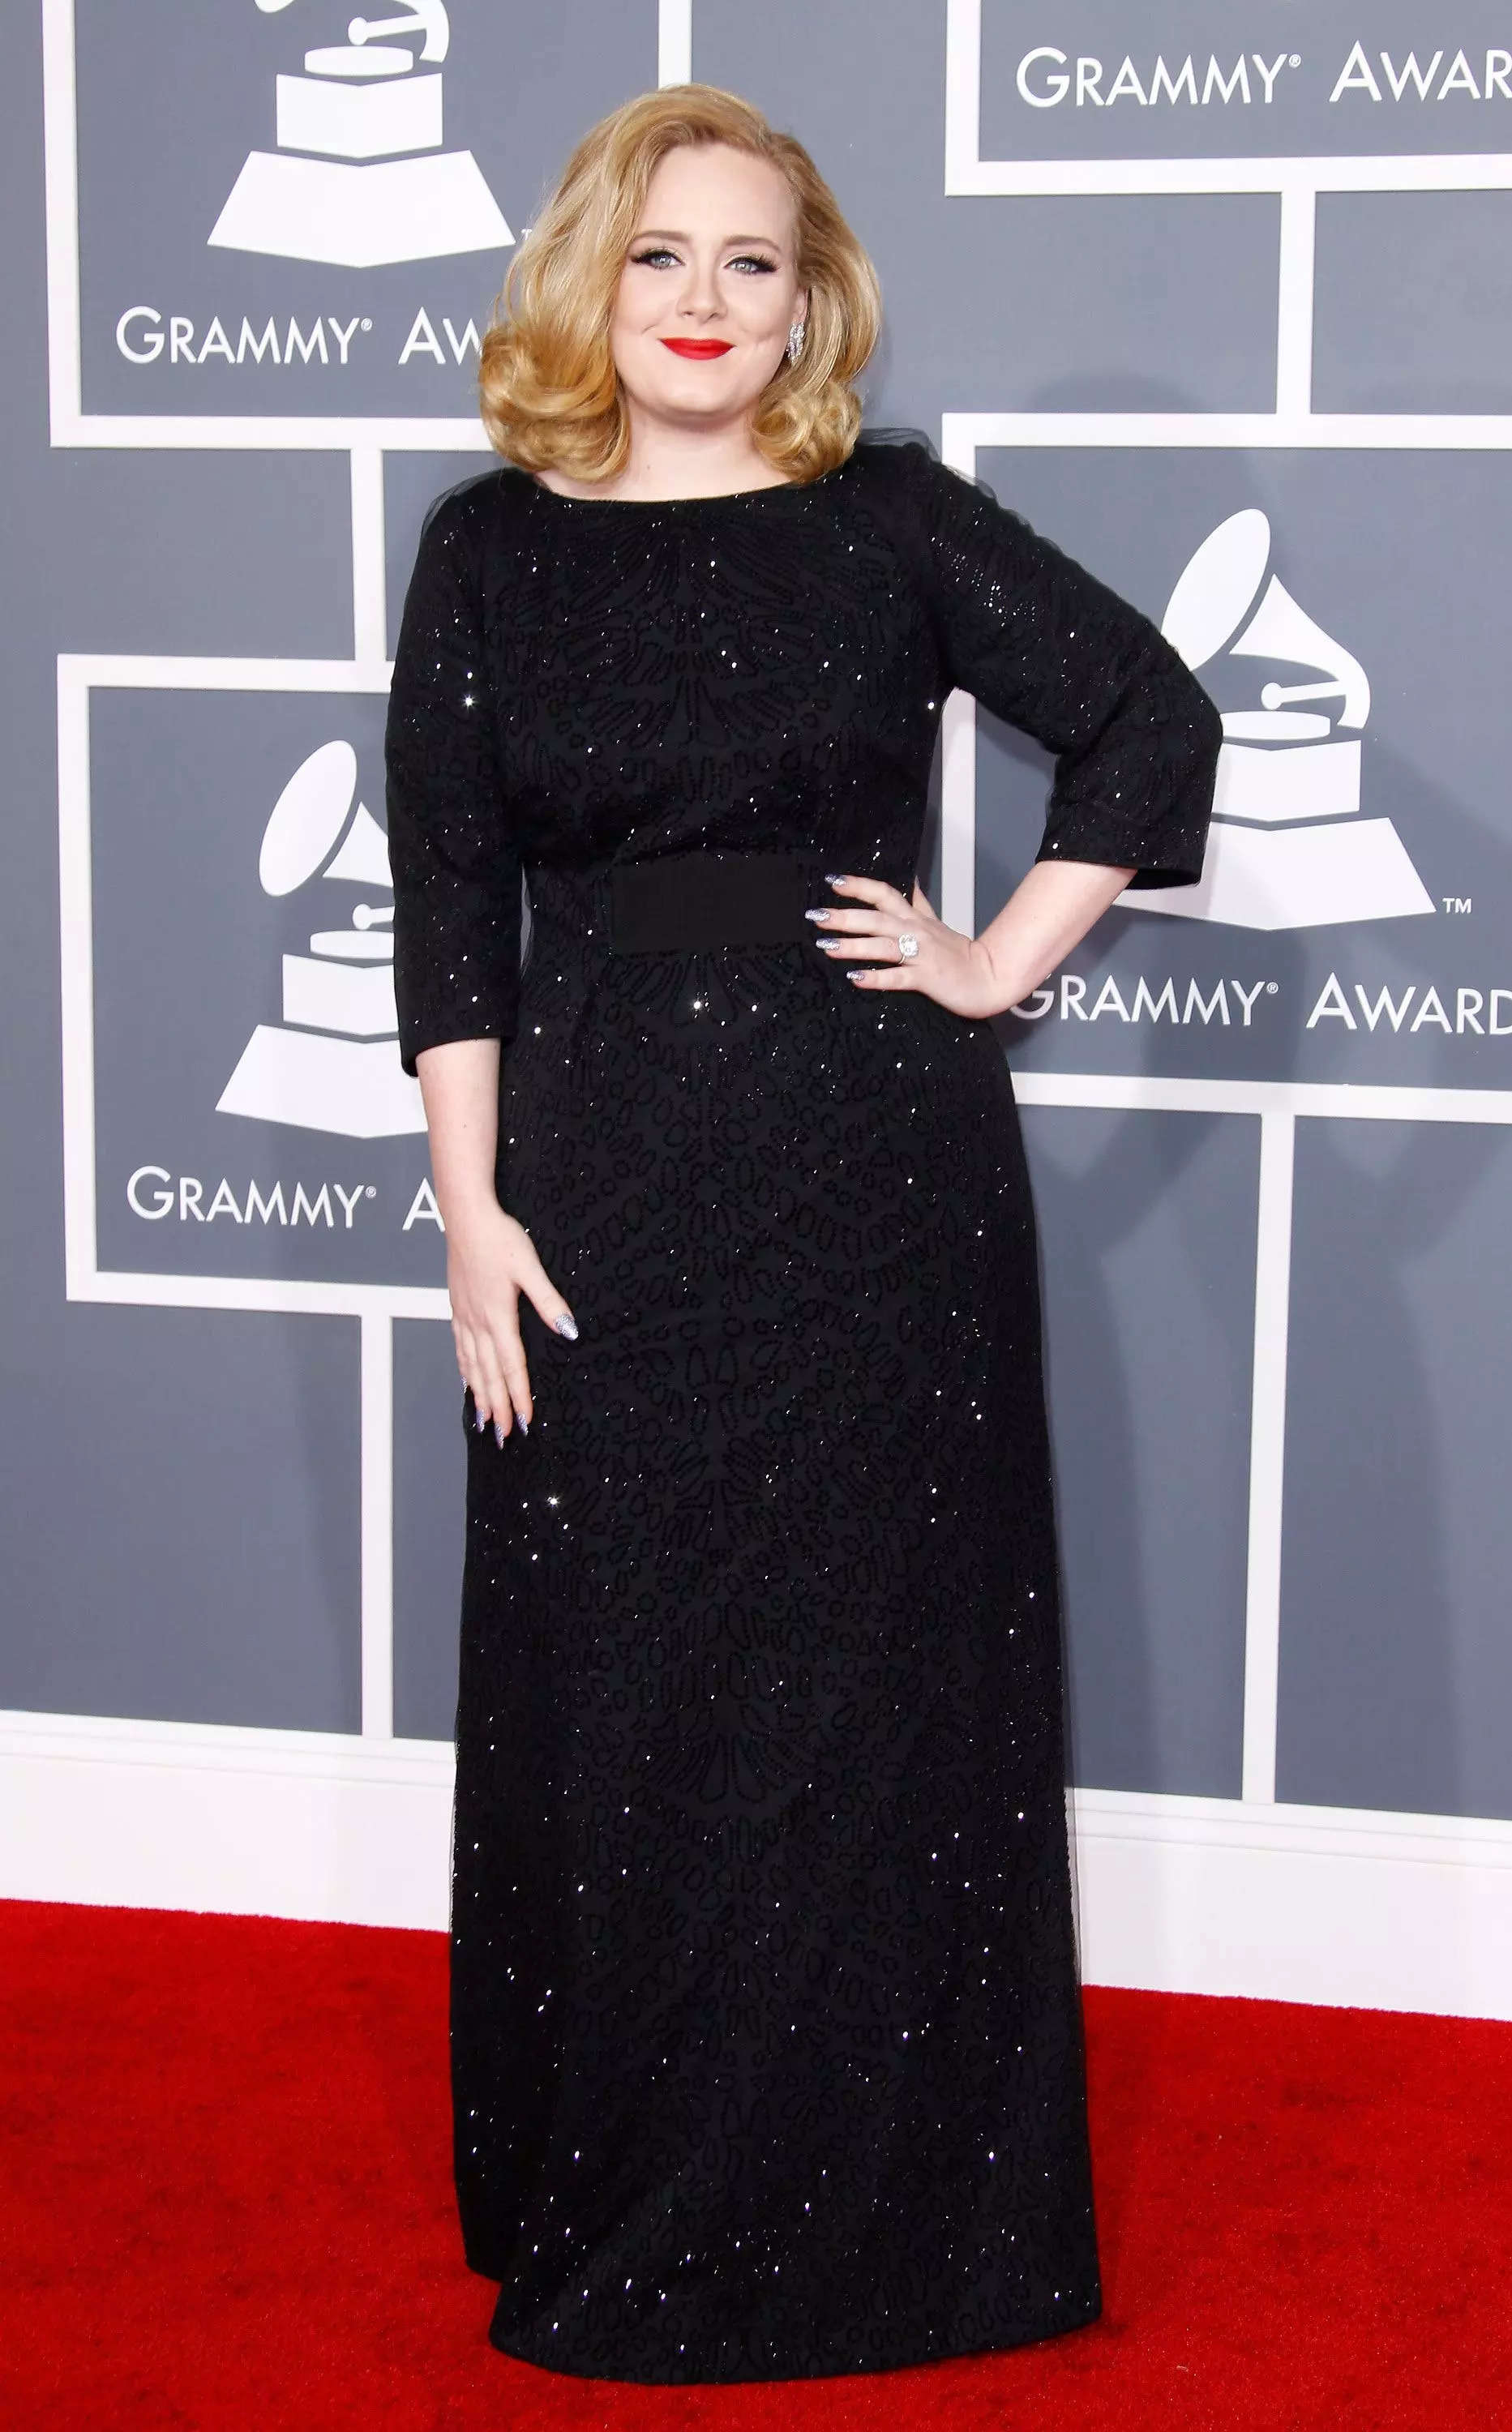 Adele says her most iconic outfit is the sparkly gown she wore to the